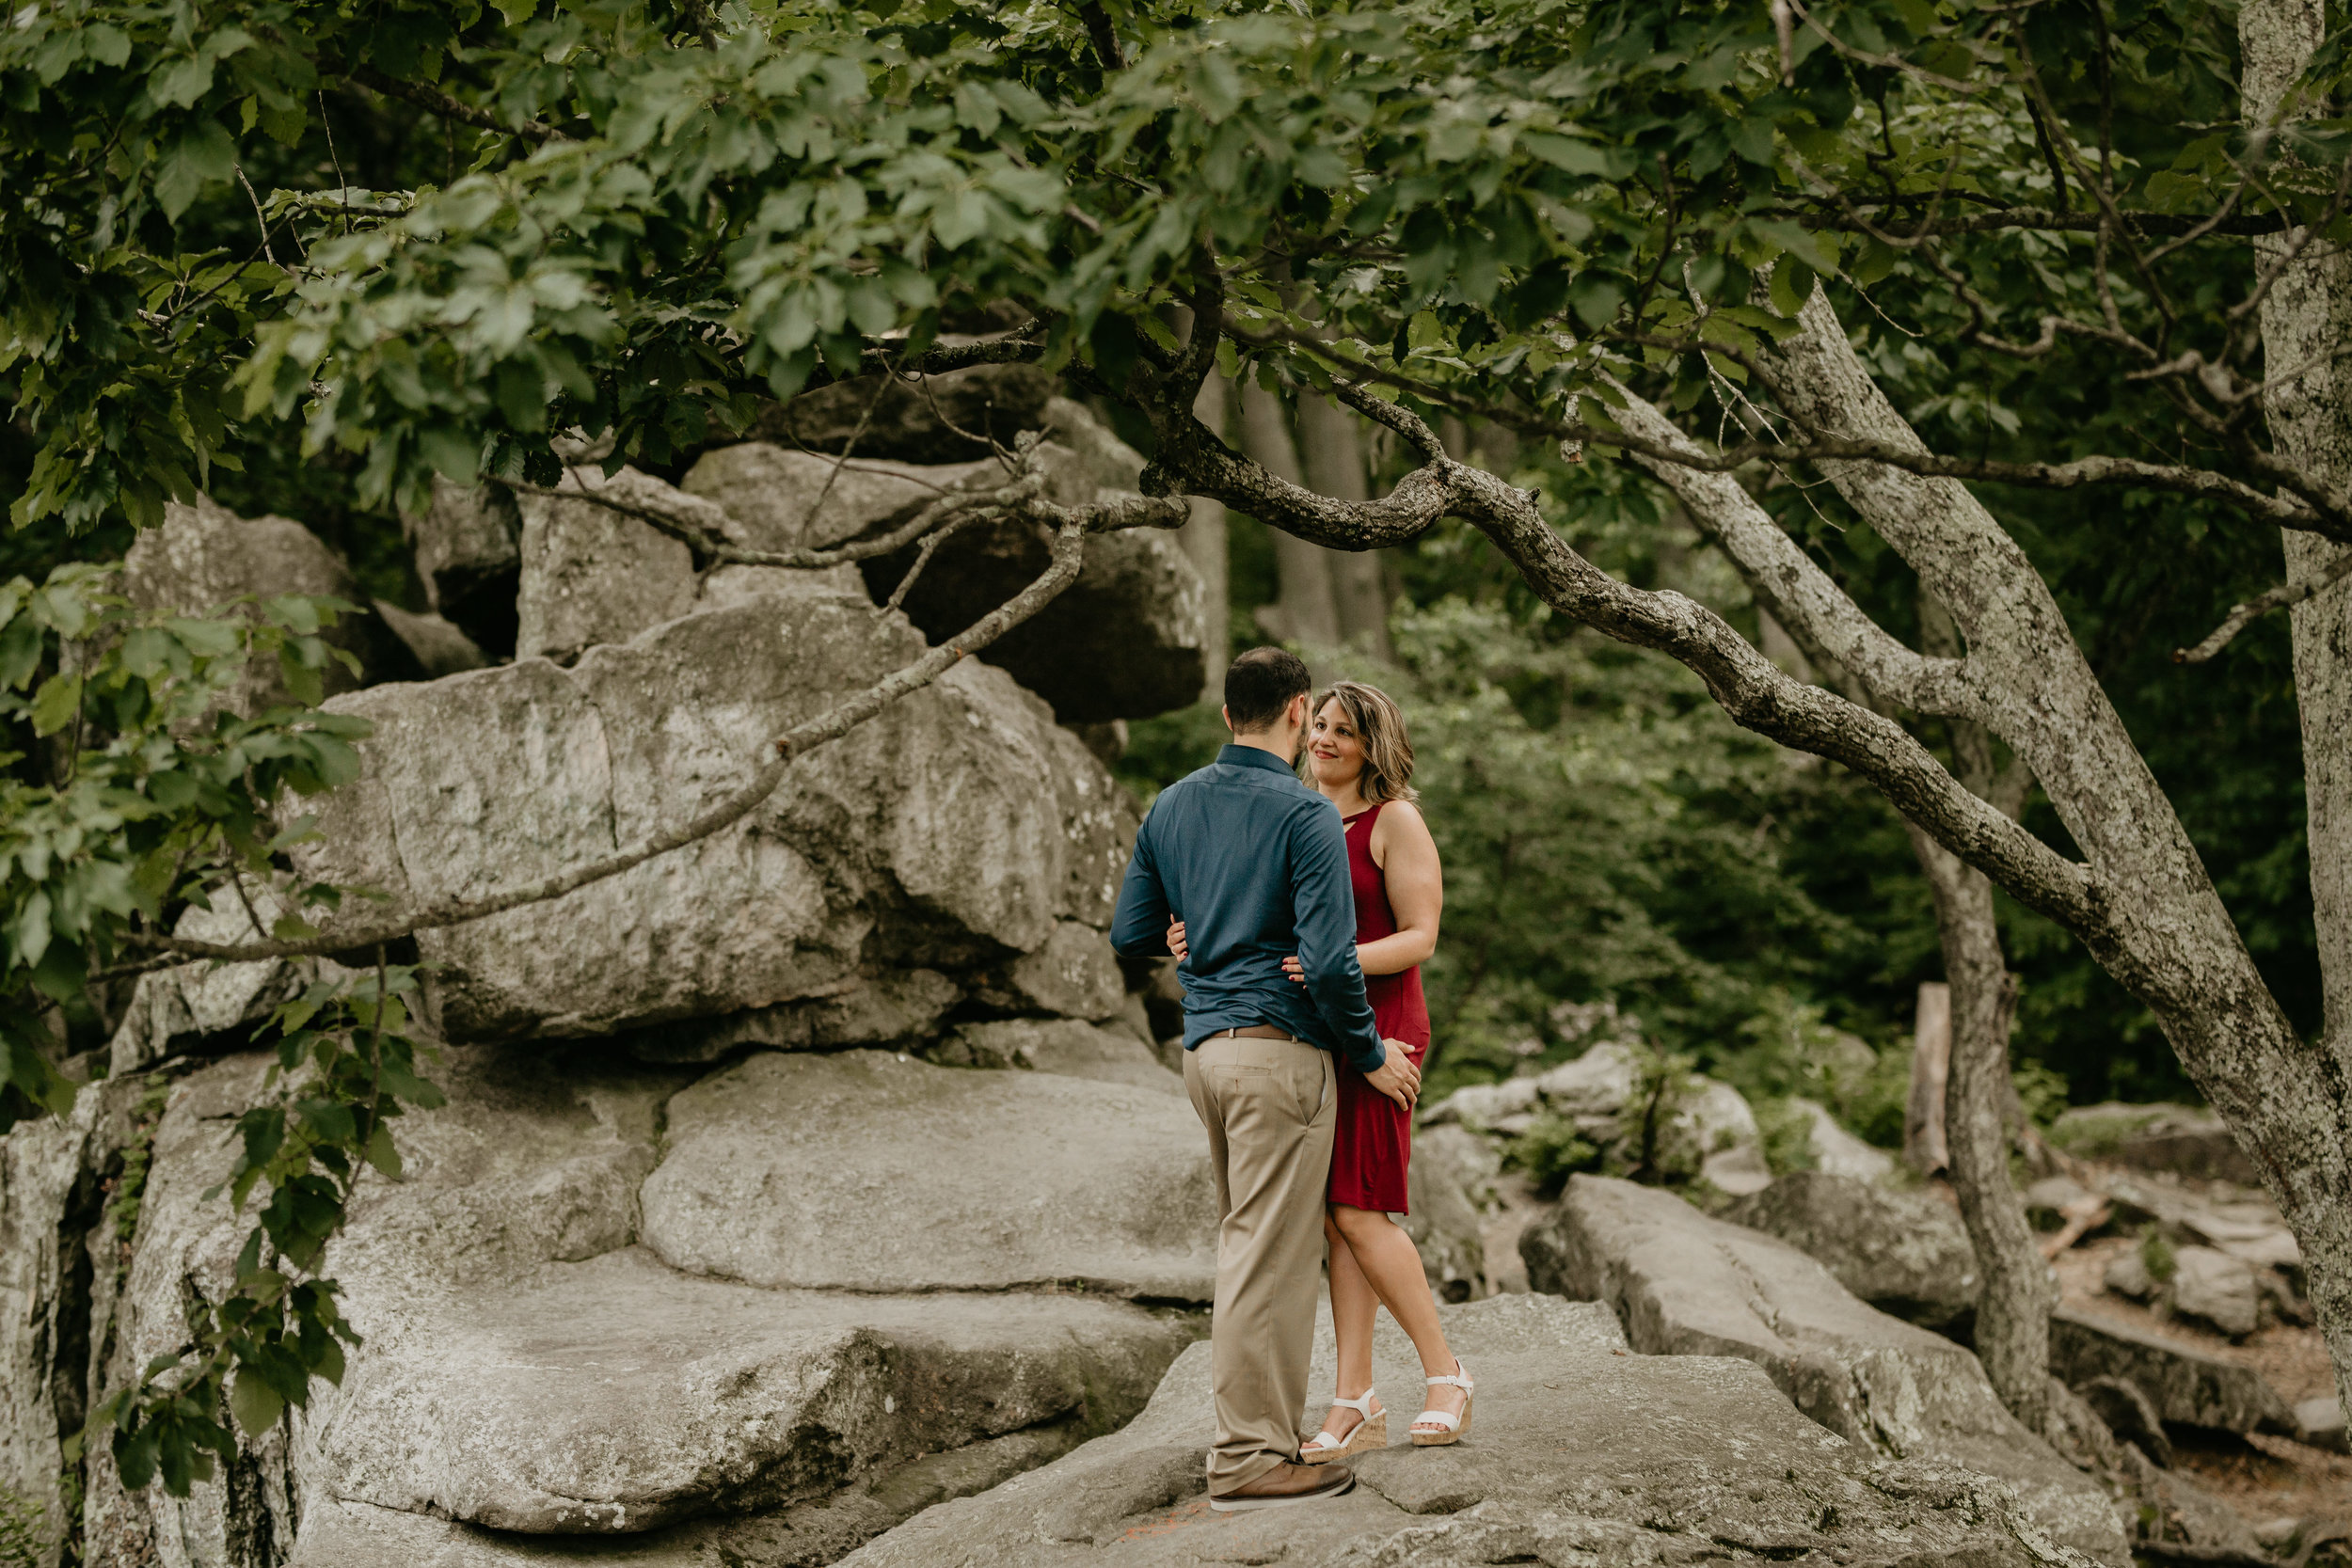 Nicole-Daacke-Photography-rock-state-park-overlook-king-queen-seat-maryland-hiking-adventure-engagement-session-photos-portraits-summer-bel-air-dog-engagement-session-18.jpg